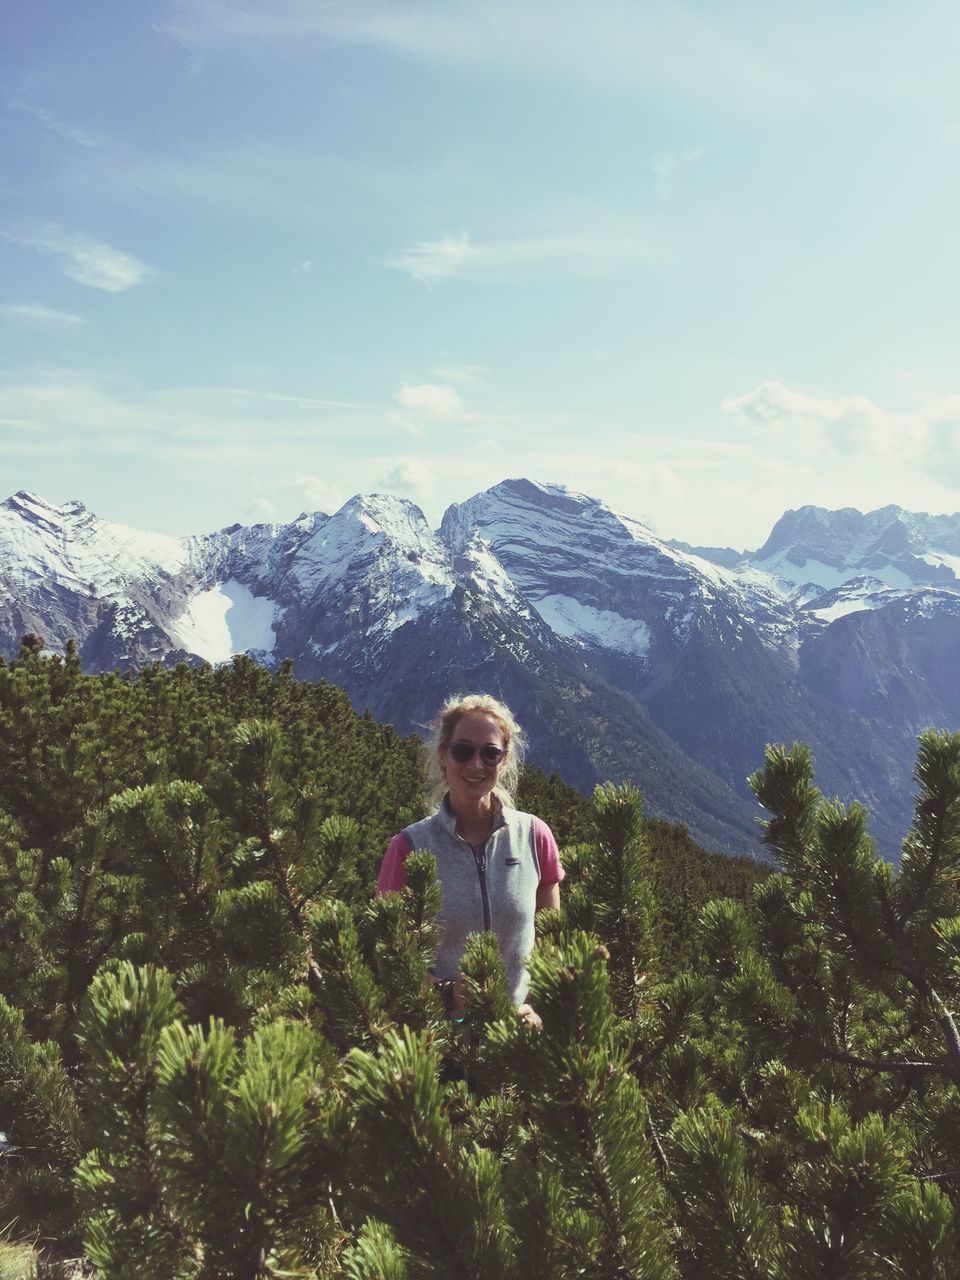 mountain, mountain range, nature, looking at camera, one person, day, mature adult, beauty in nature, leisure activity, real people, sky, lifestyles, casual clothing, mature women, vacations, portrait, scenics, outdoors, happiness, hiking, adventure, standing, smiling, snow, young adult, young women, people